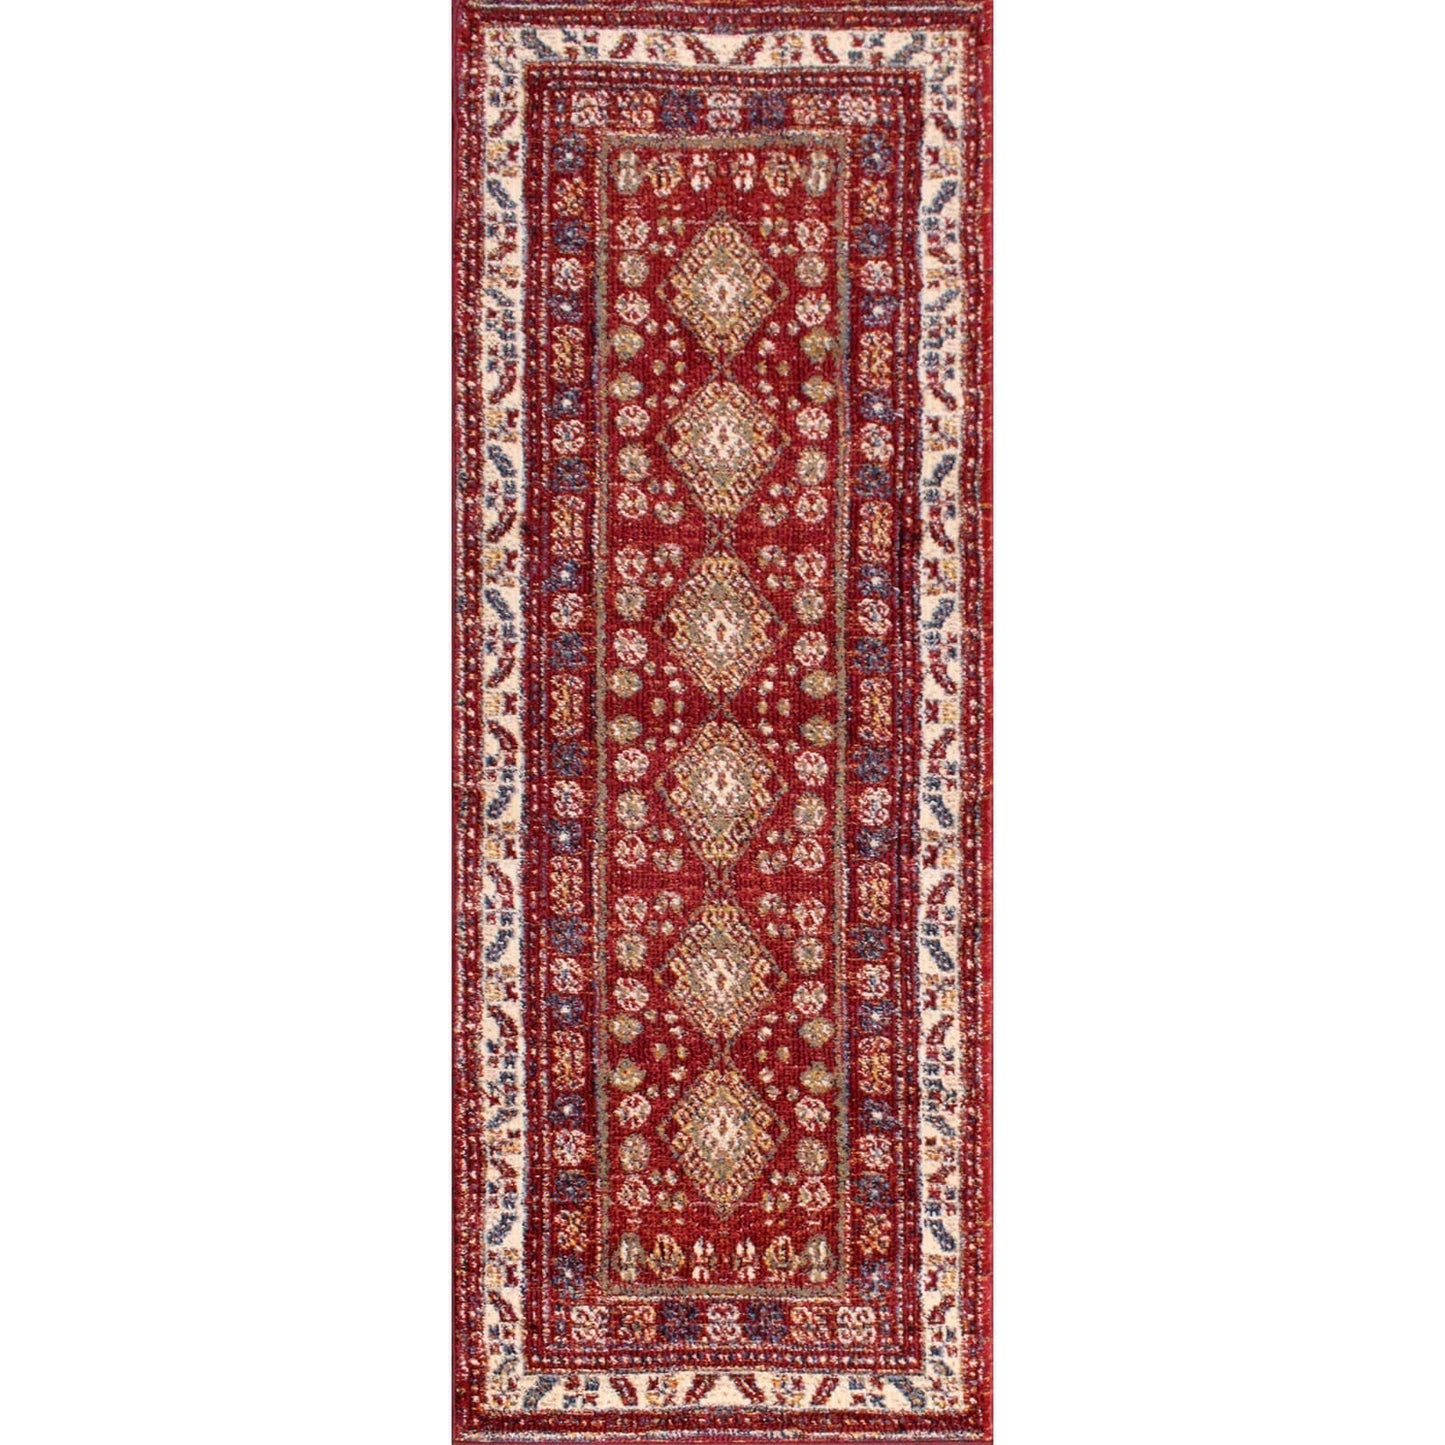 Orient 2520 Orange and Terracotta Traditional Rugs